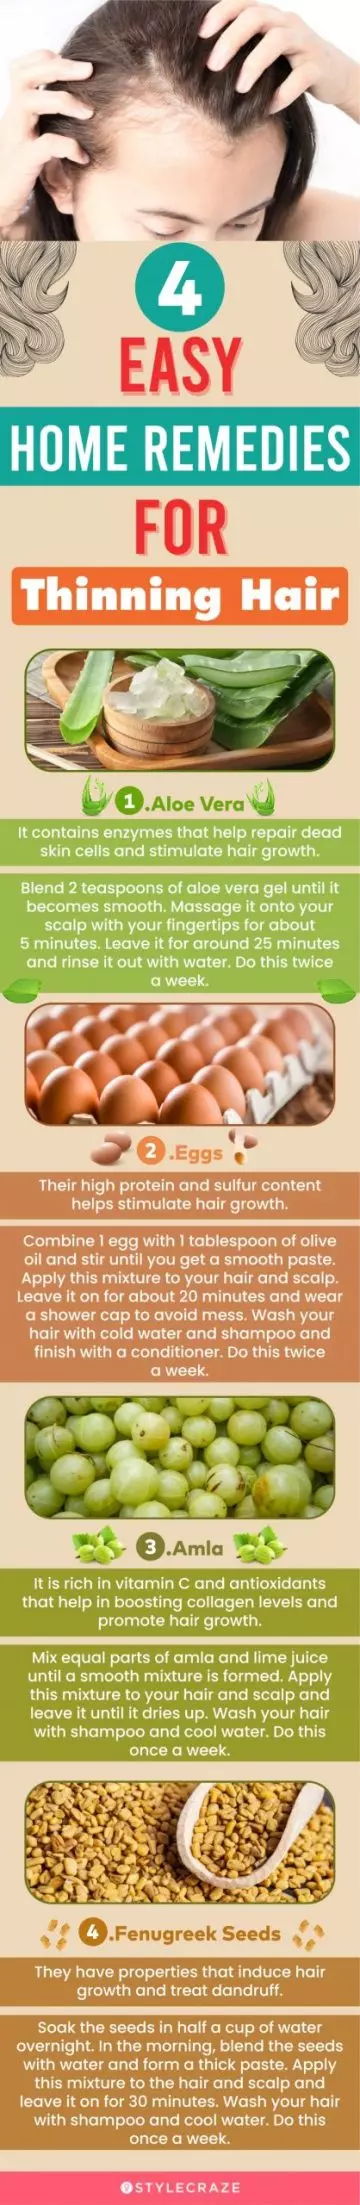 4 easy home remedies for thinning hair (infographic)